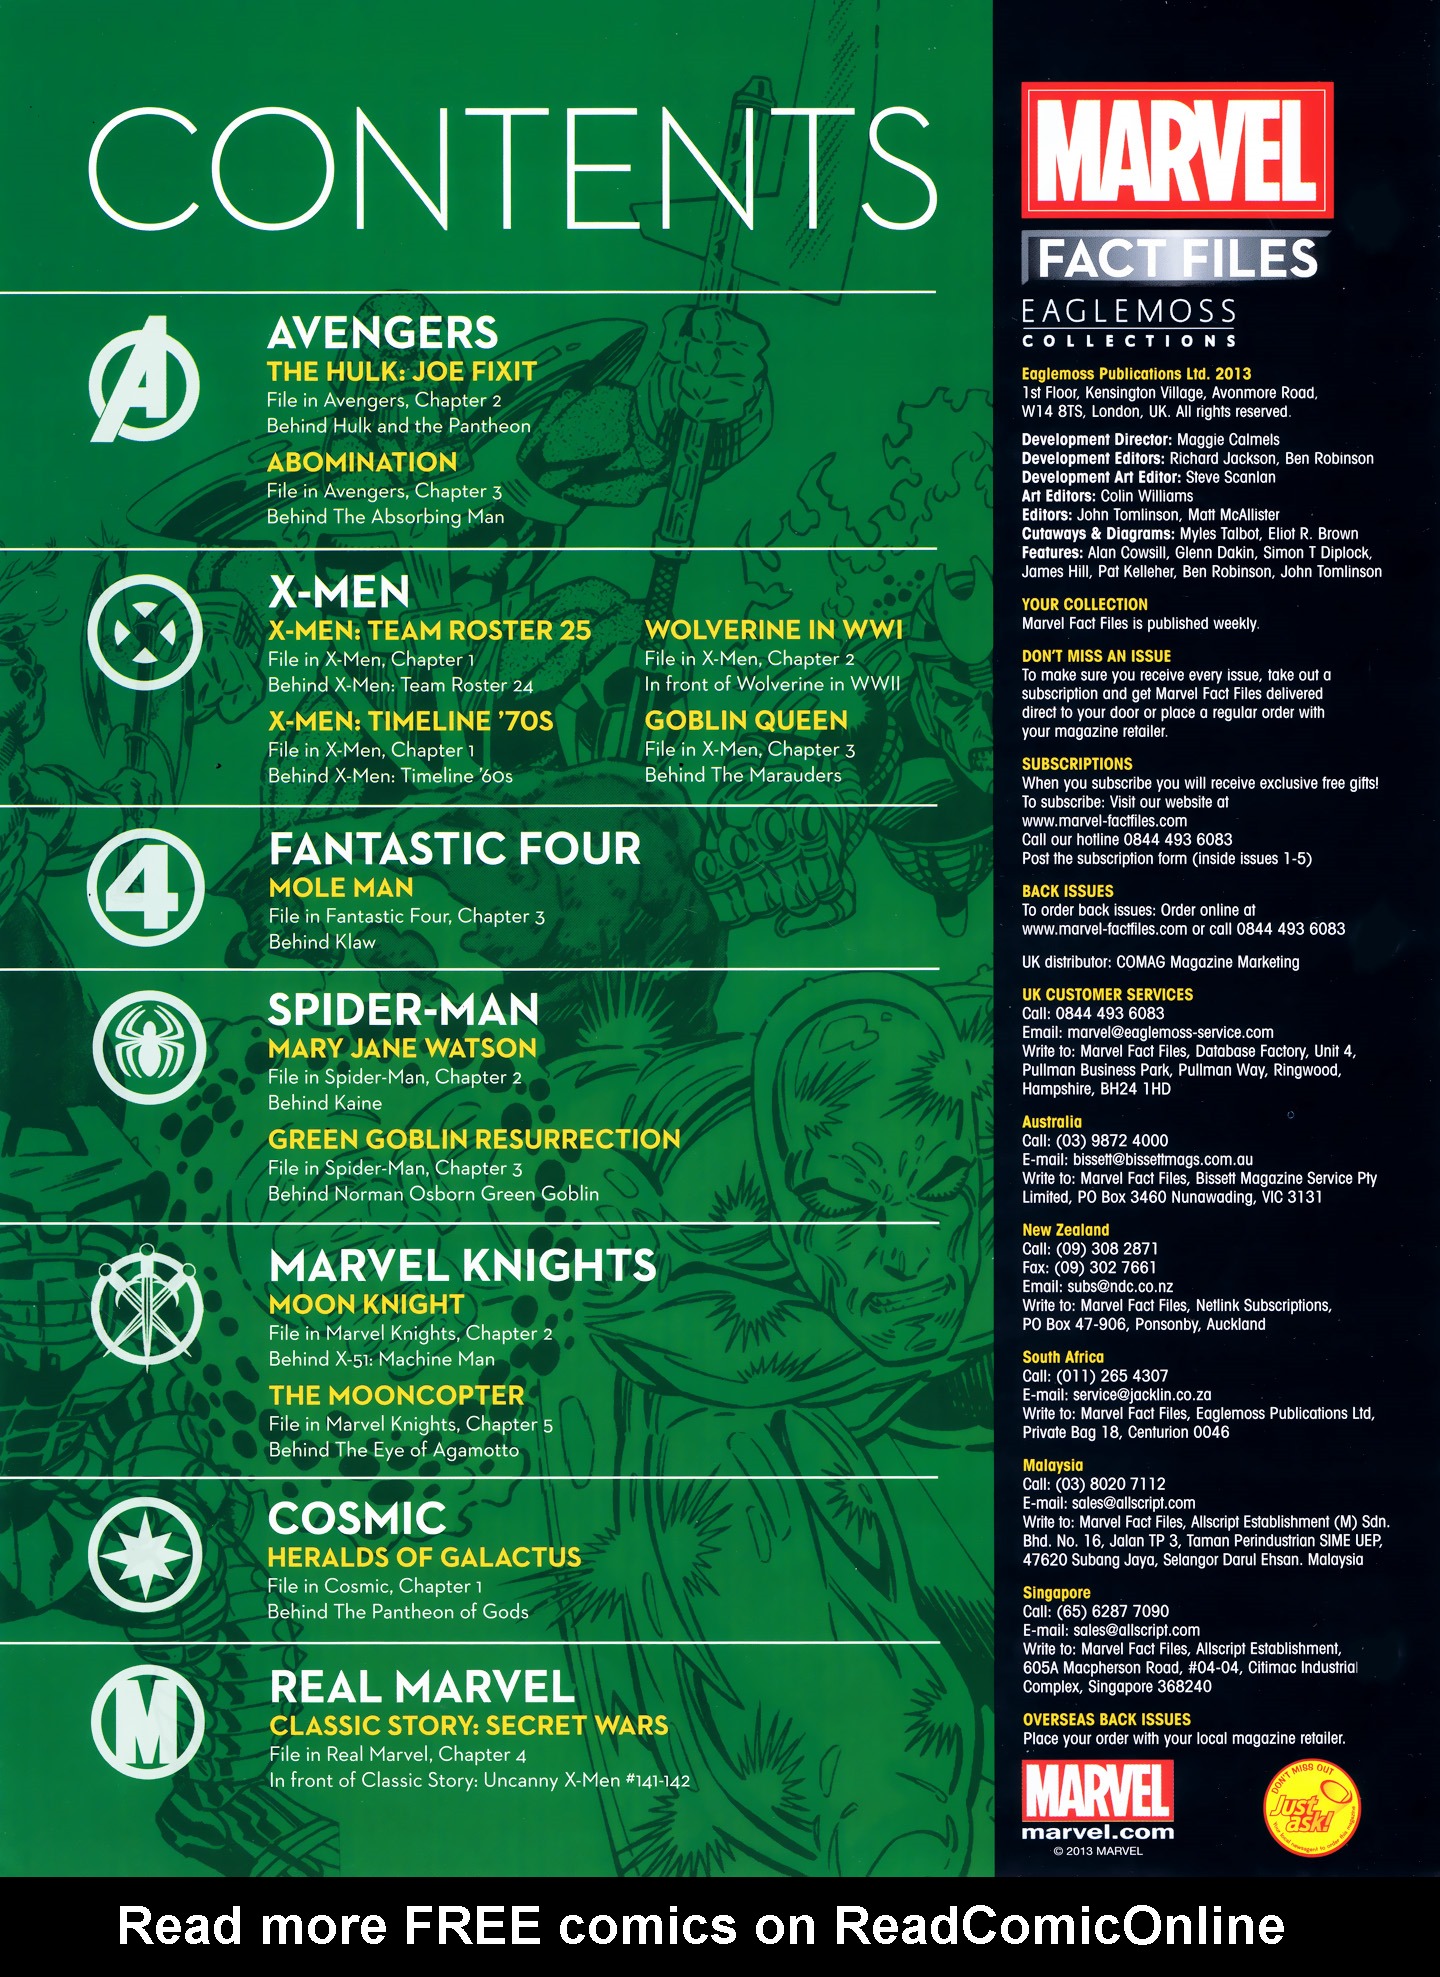 Read online Marvel Fact Files comic -  Issue #25 - 3